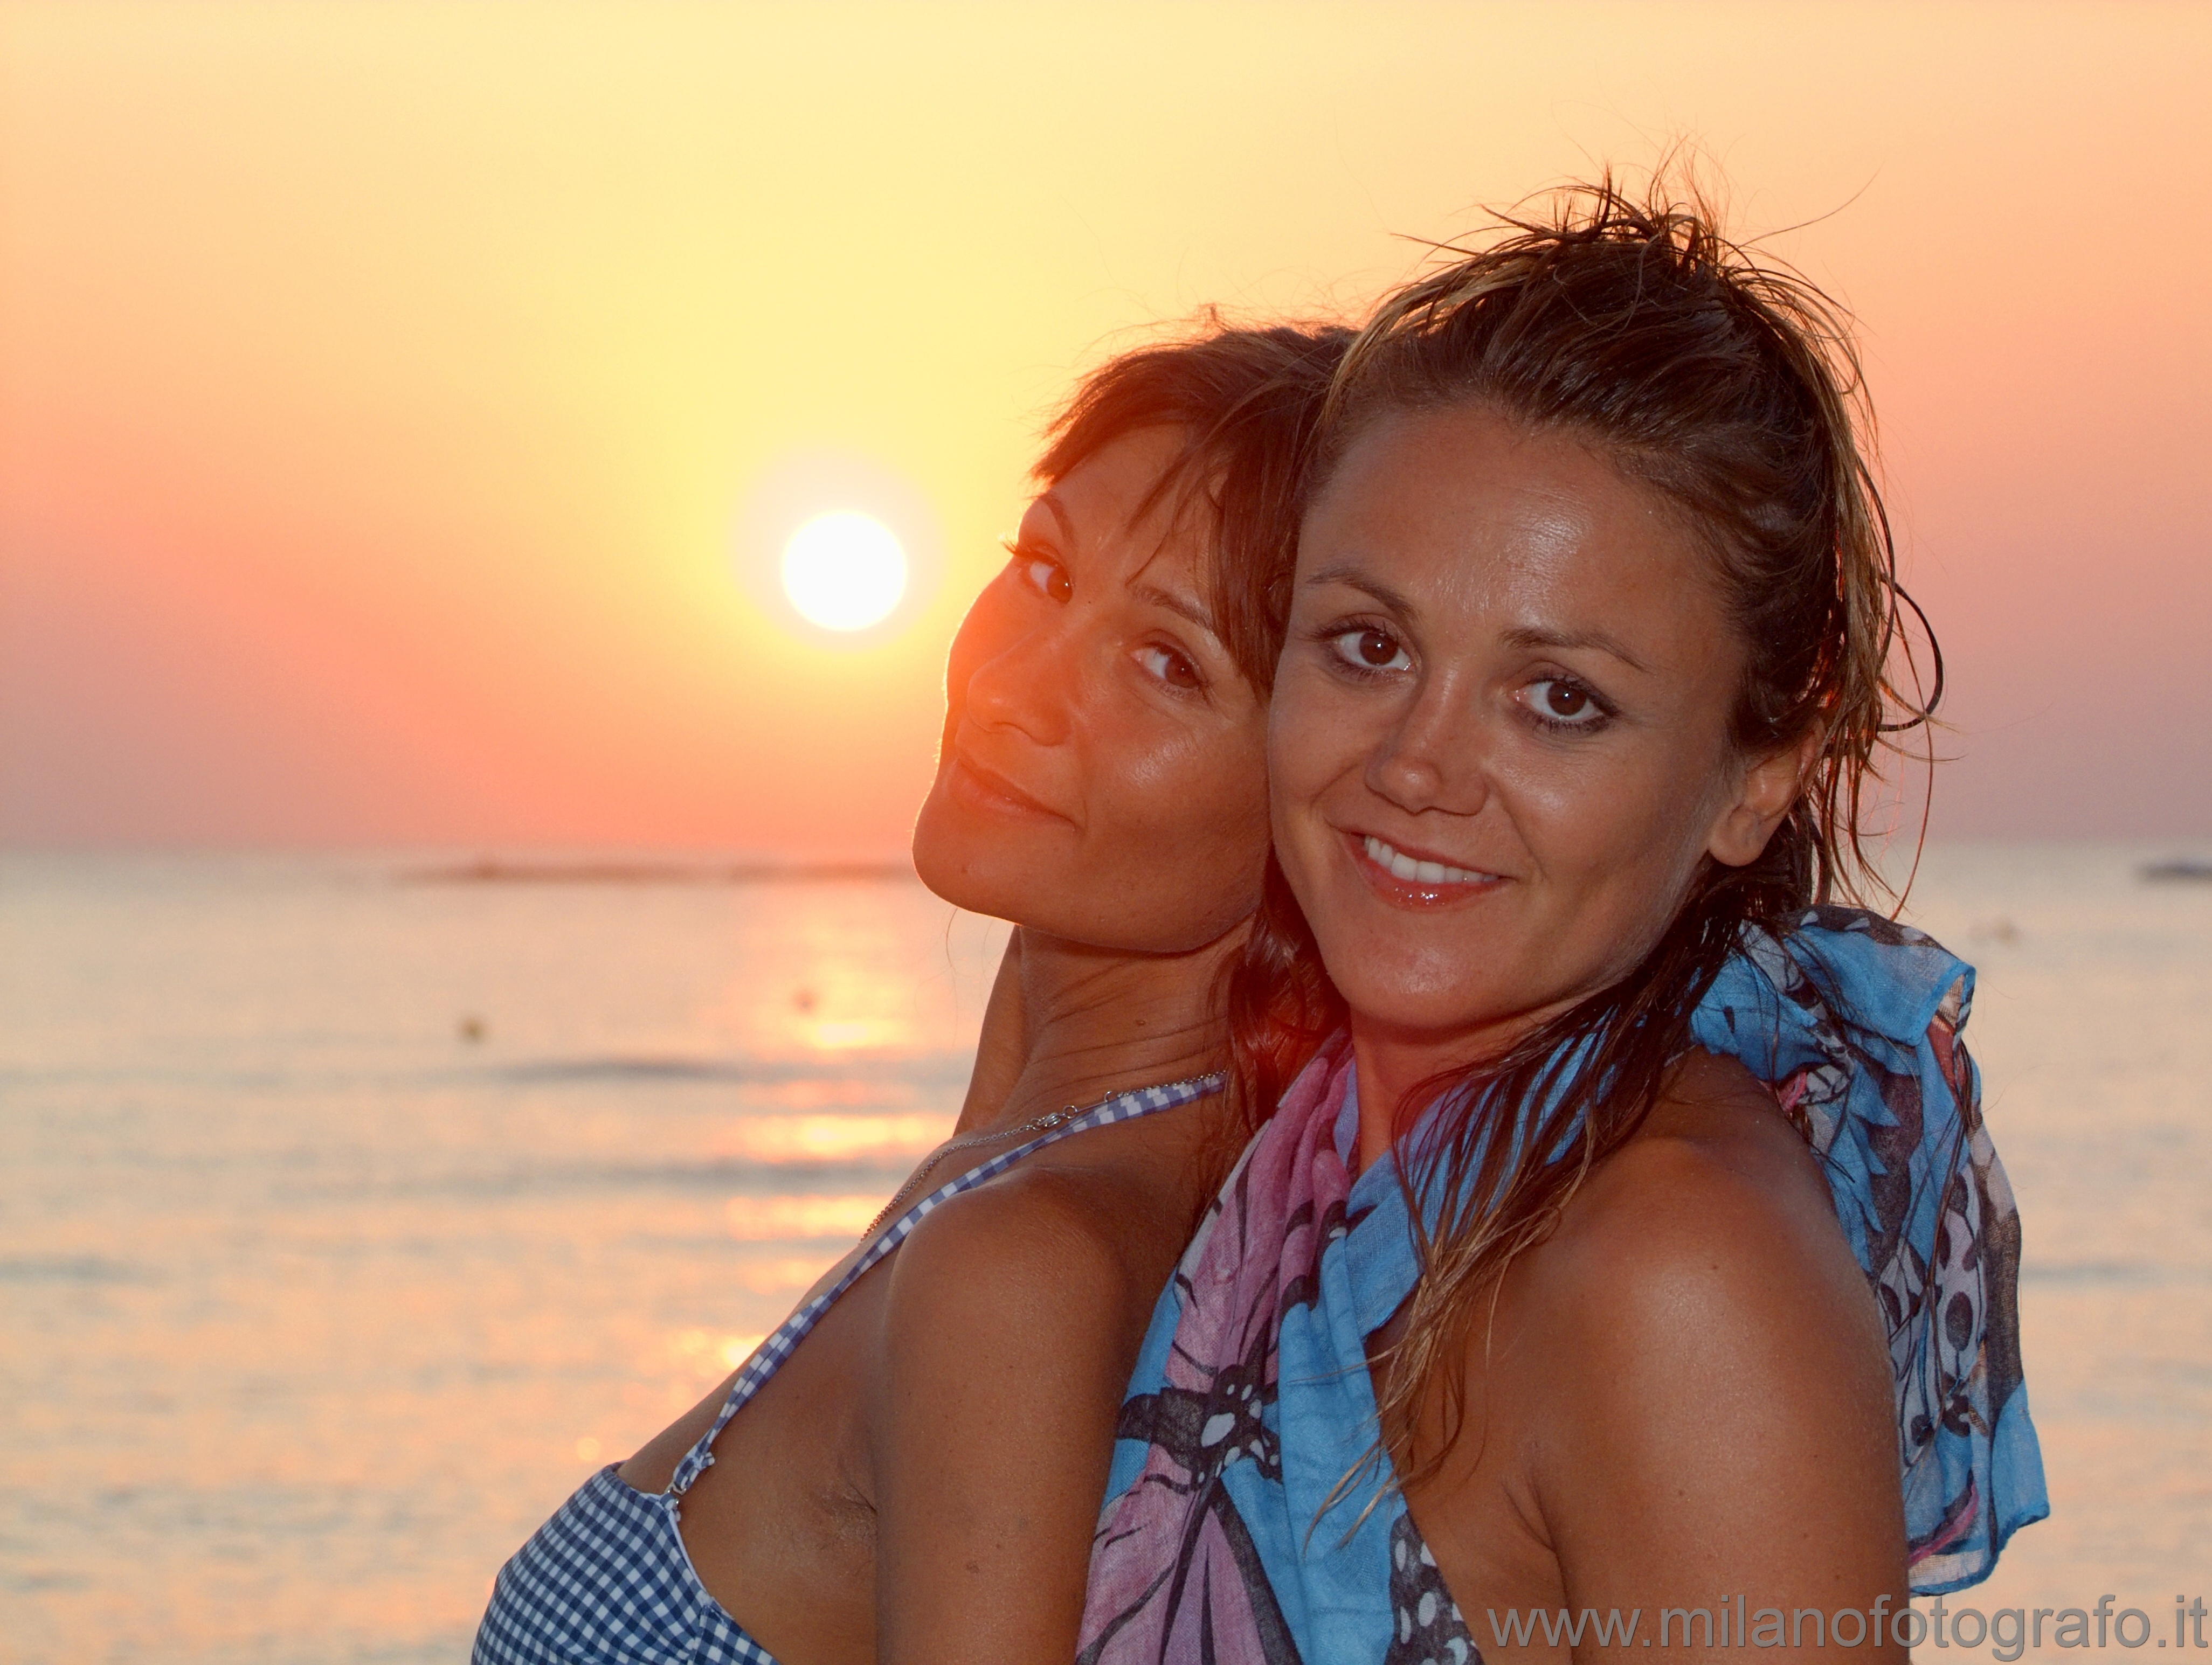 Torre San Giovanni (Lecce, Italy): Double female portrait with the sunset on the sea in the beckground - Torre San Giovanni (Lecce, Italy)